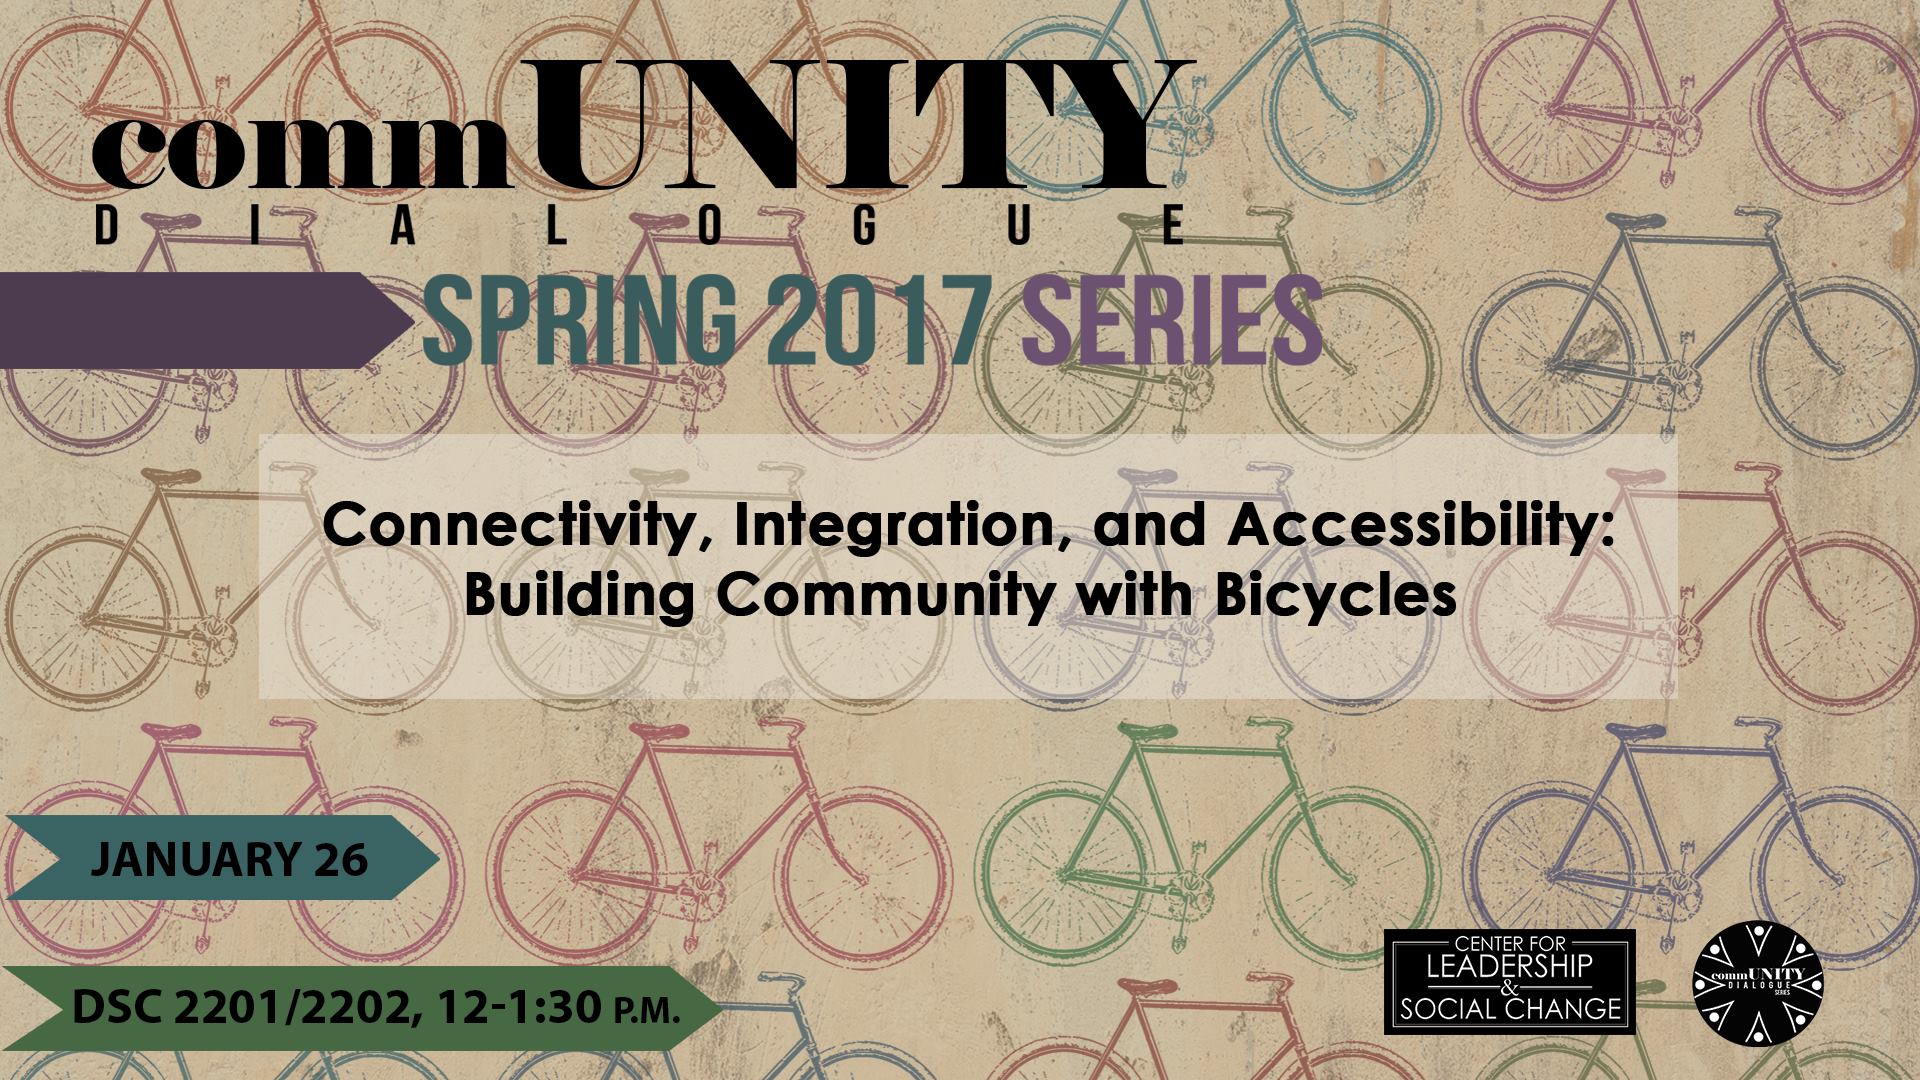 commUNITY Dialogue: Connectivity, Integration, and Accessibility - Building Community with Bicycles, Jan. 26, 12 - 1:30 p.m., DSC 2201/2202